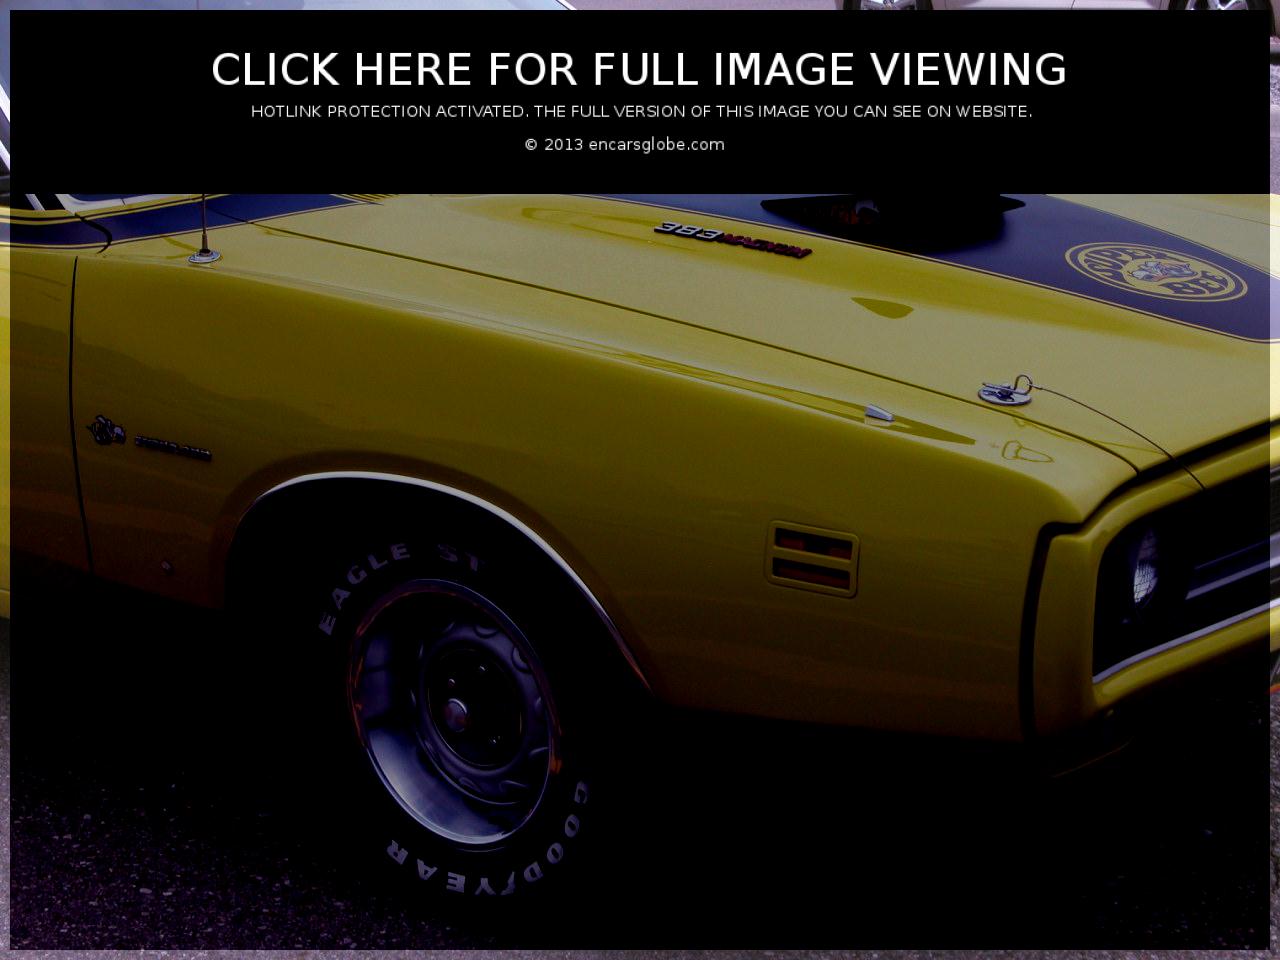 Dodge Charger Super Bee 383: Photo gallery, complete information ...